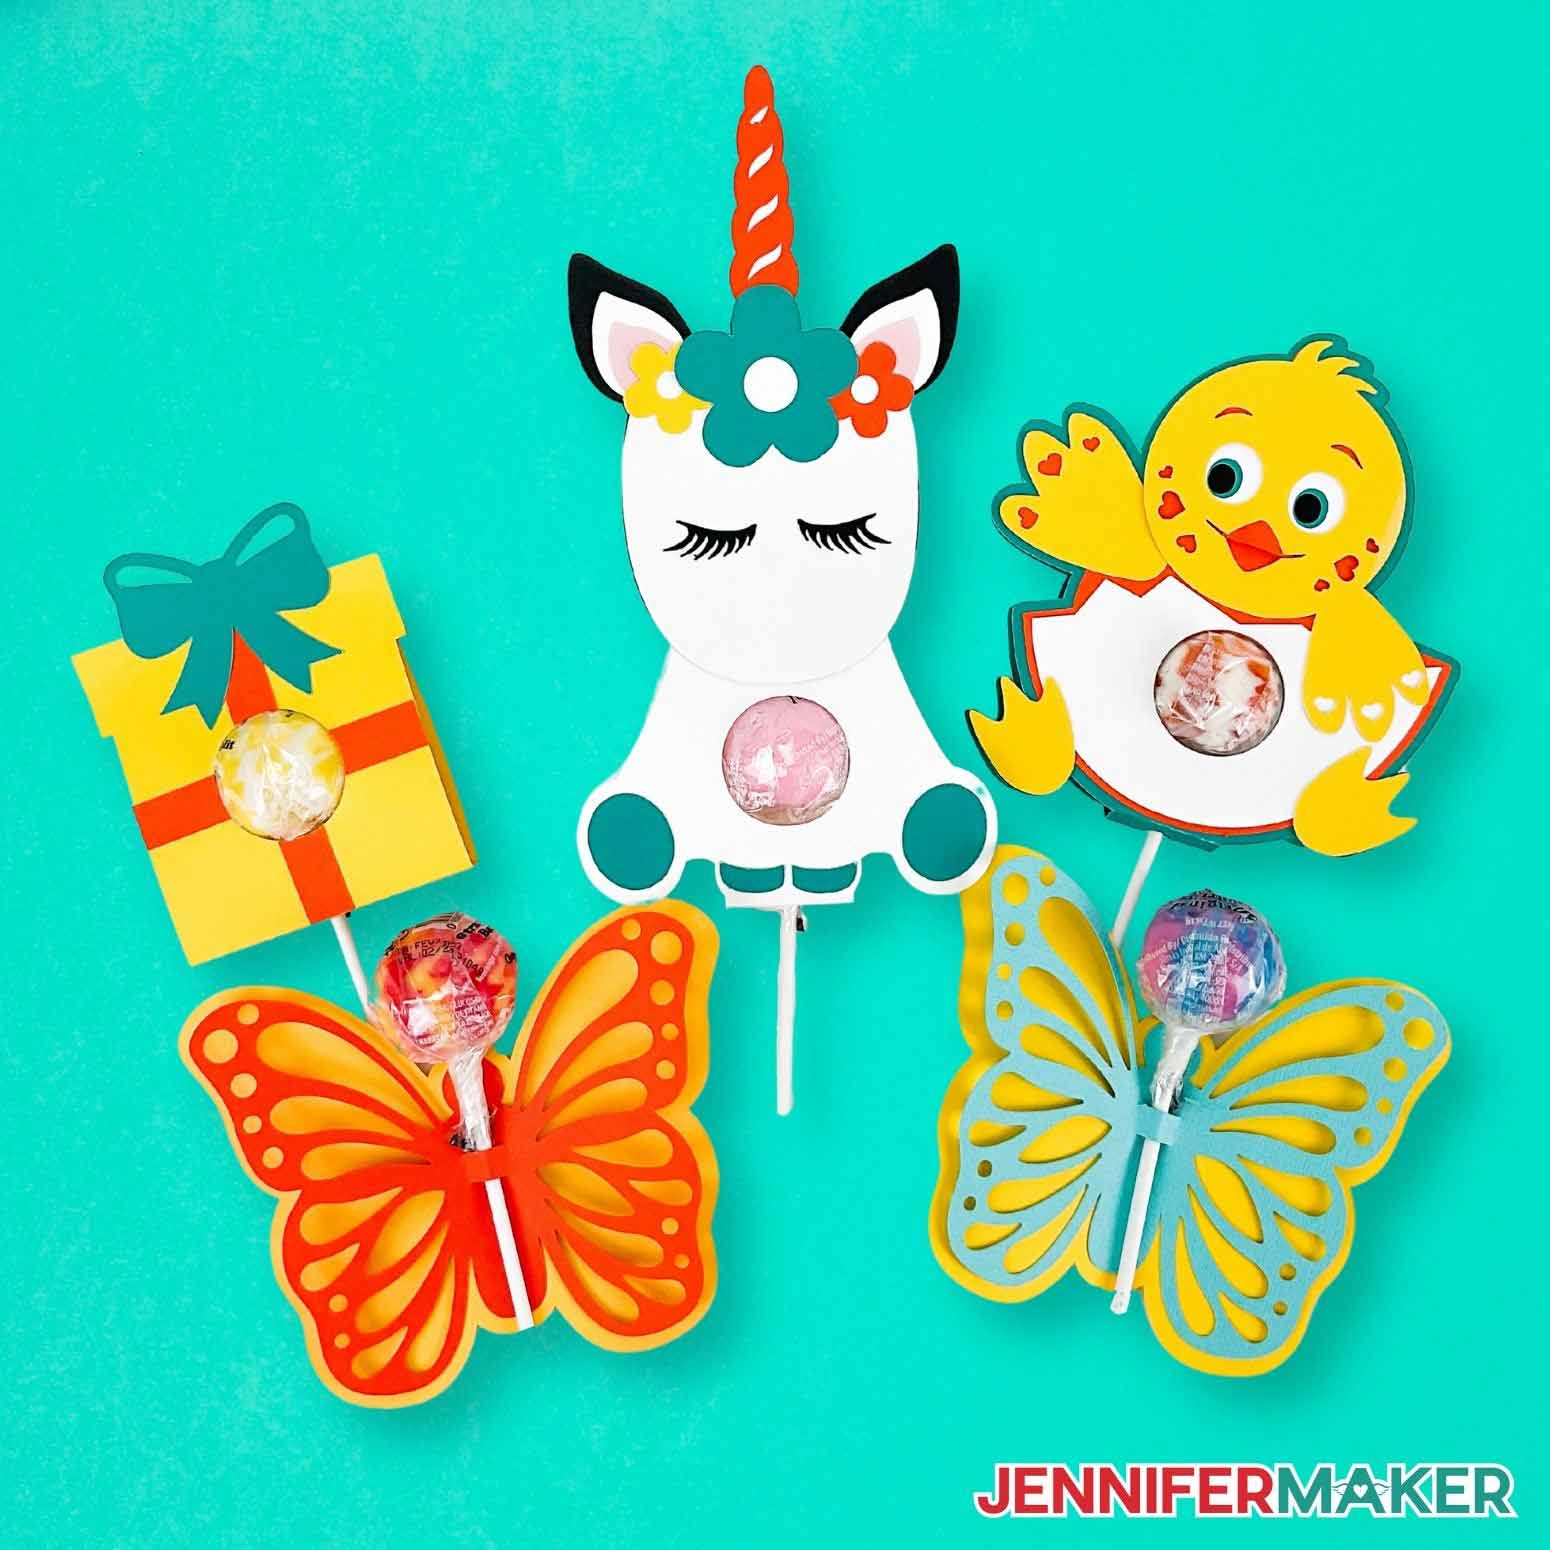 Present, unicorn, chick, and butterfly cardstock lollipop holders on a teal background.